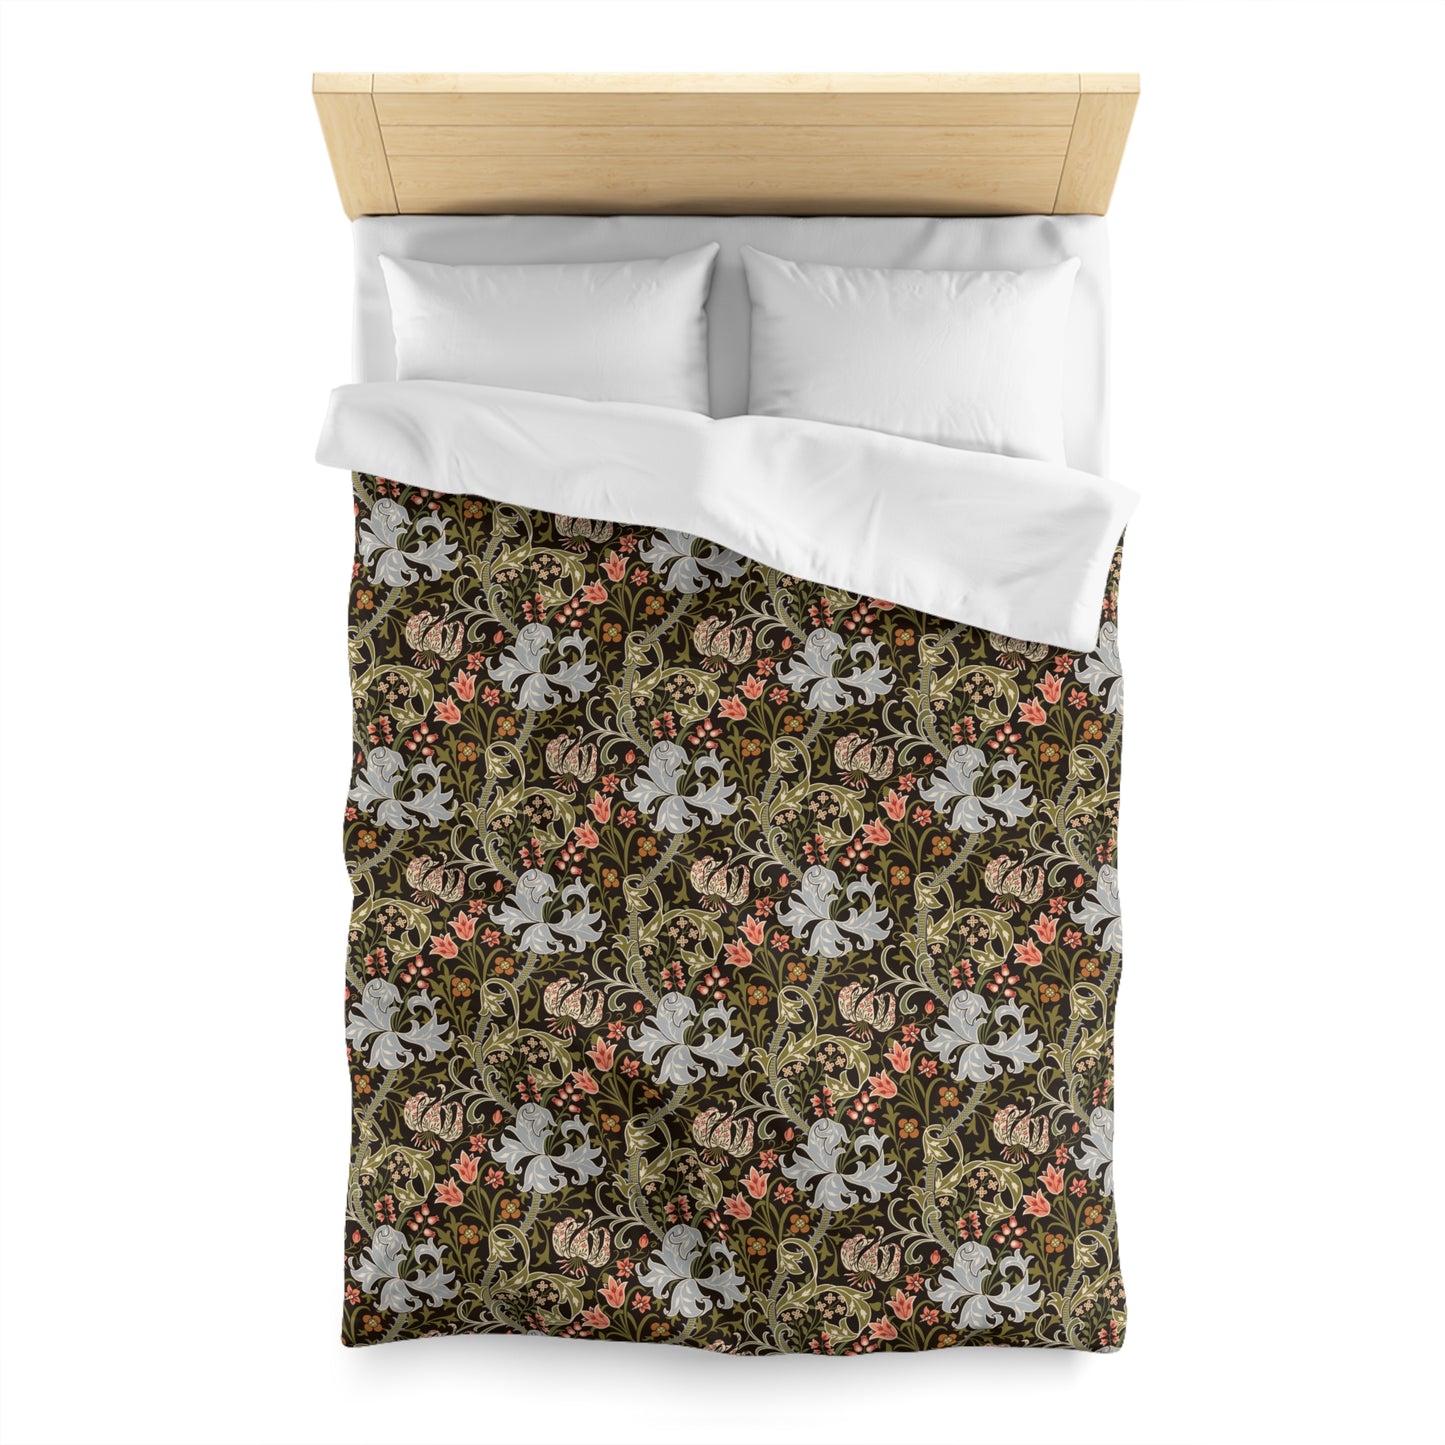 william-morris-co-duvet-cover-golden-lily-collection-midnight-4